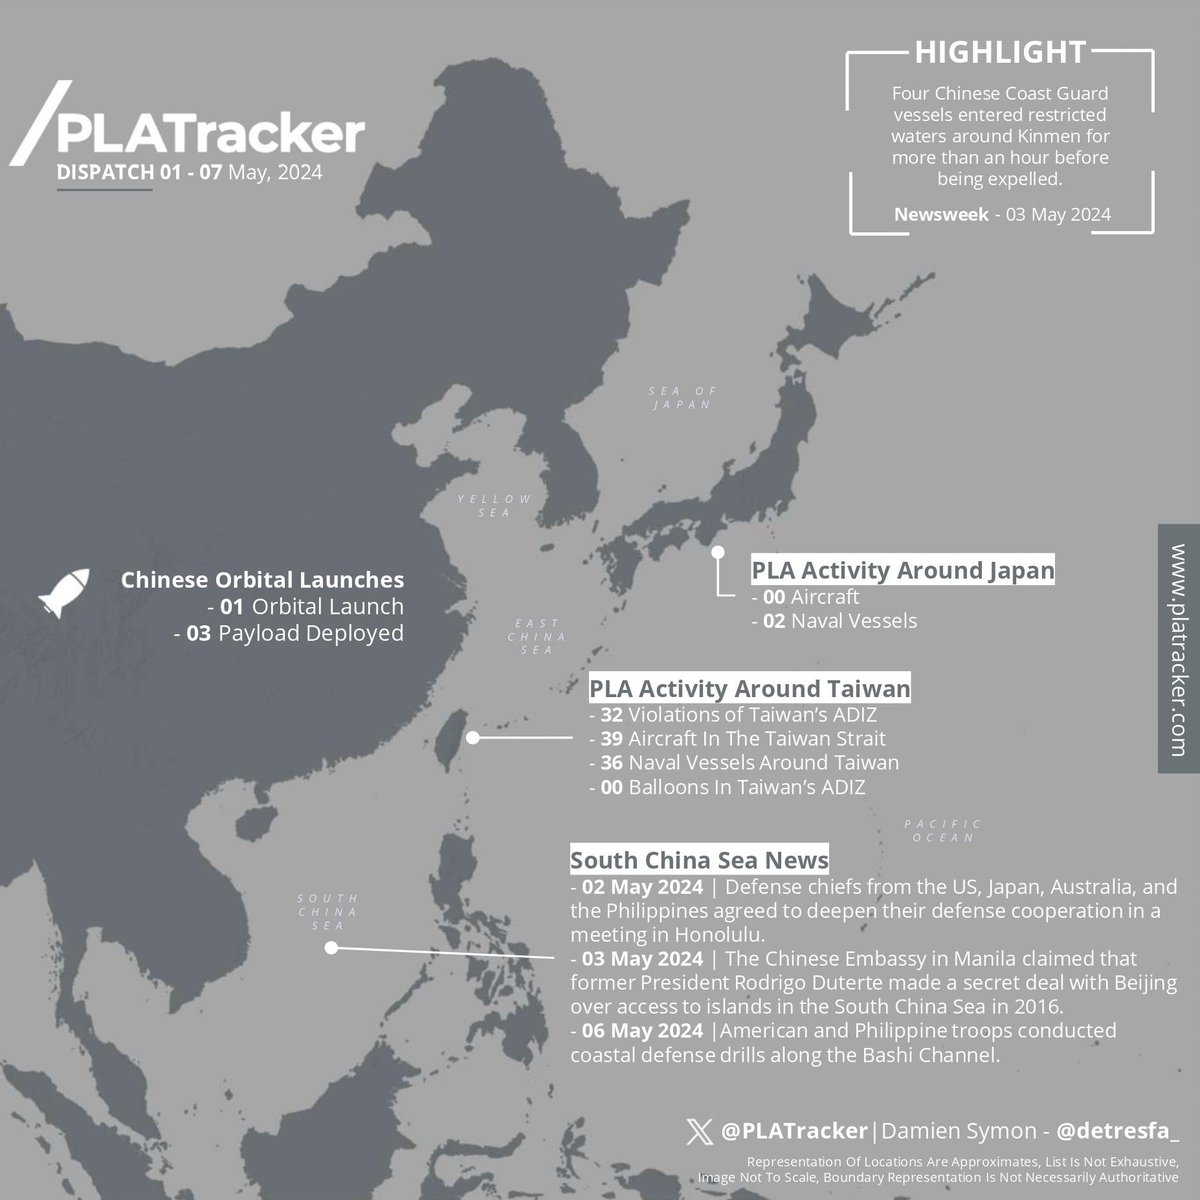 PLATracker DISPATCH 01 - 07 May 2024 Partnering with @detresfa_ we track PLA activity around Taiwan, Chinese Coast Guard activity near Kinmen, and more: